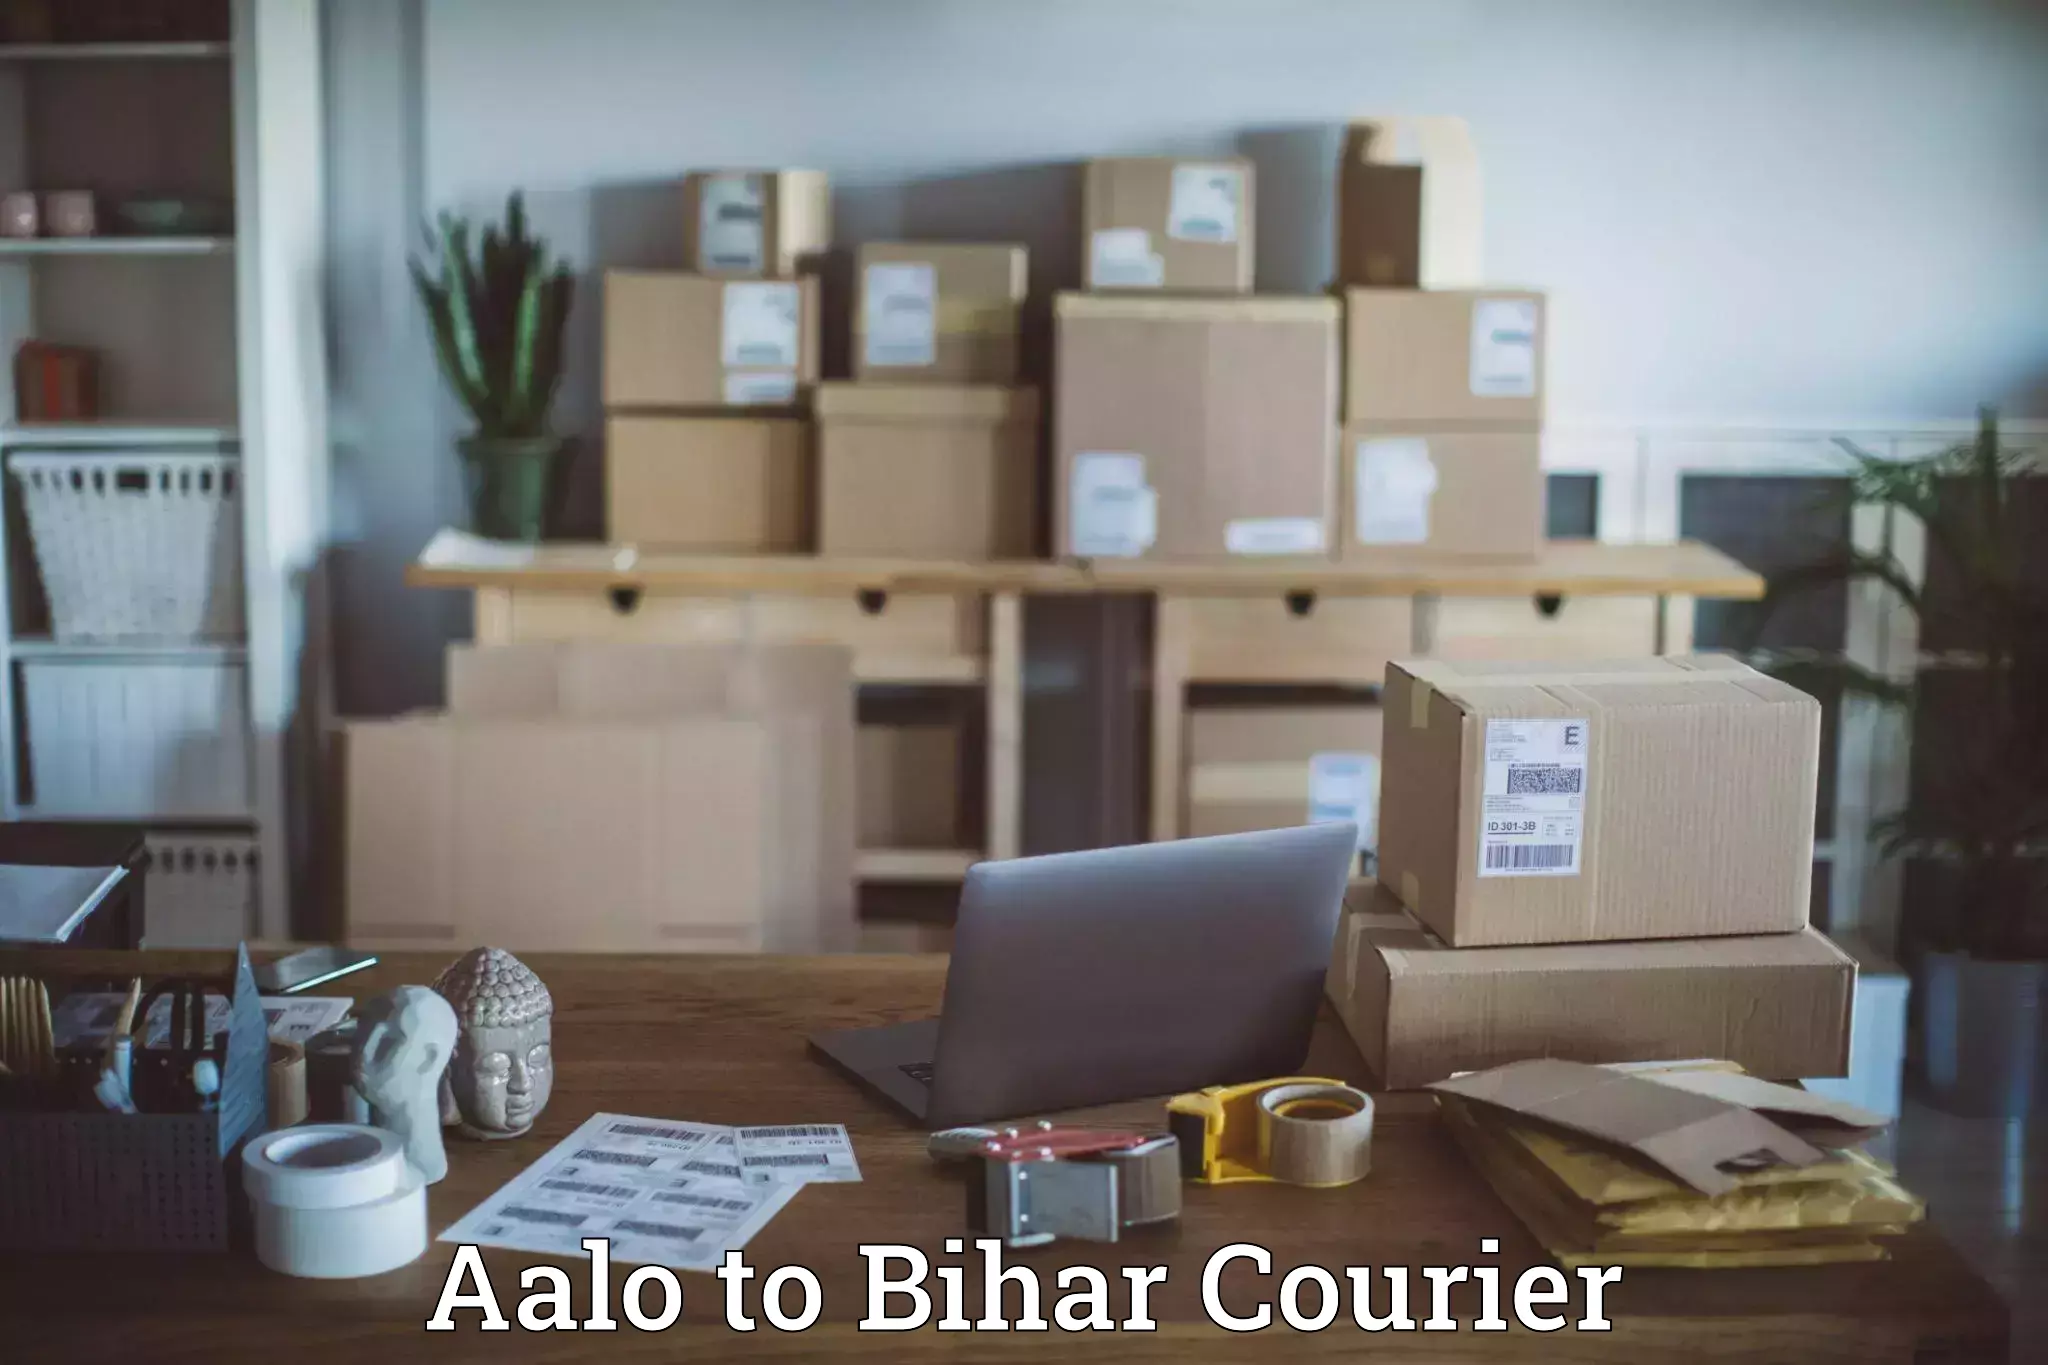 24/7 courier service Aalo to Dhaka